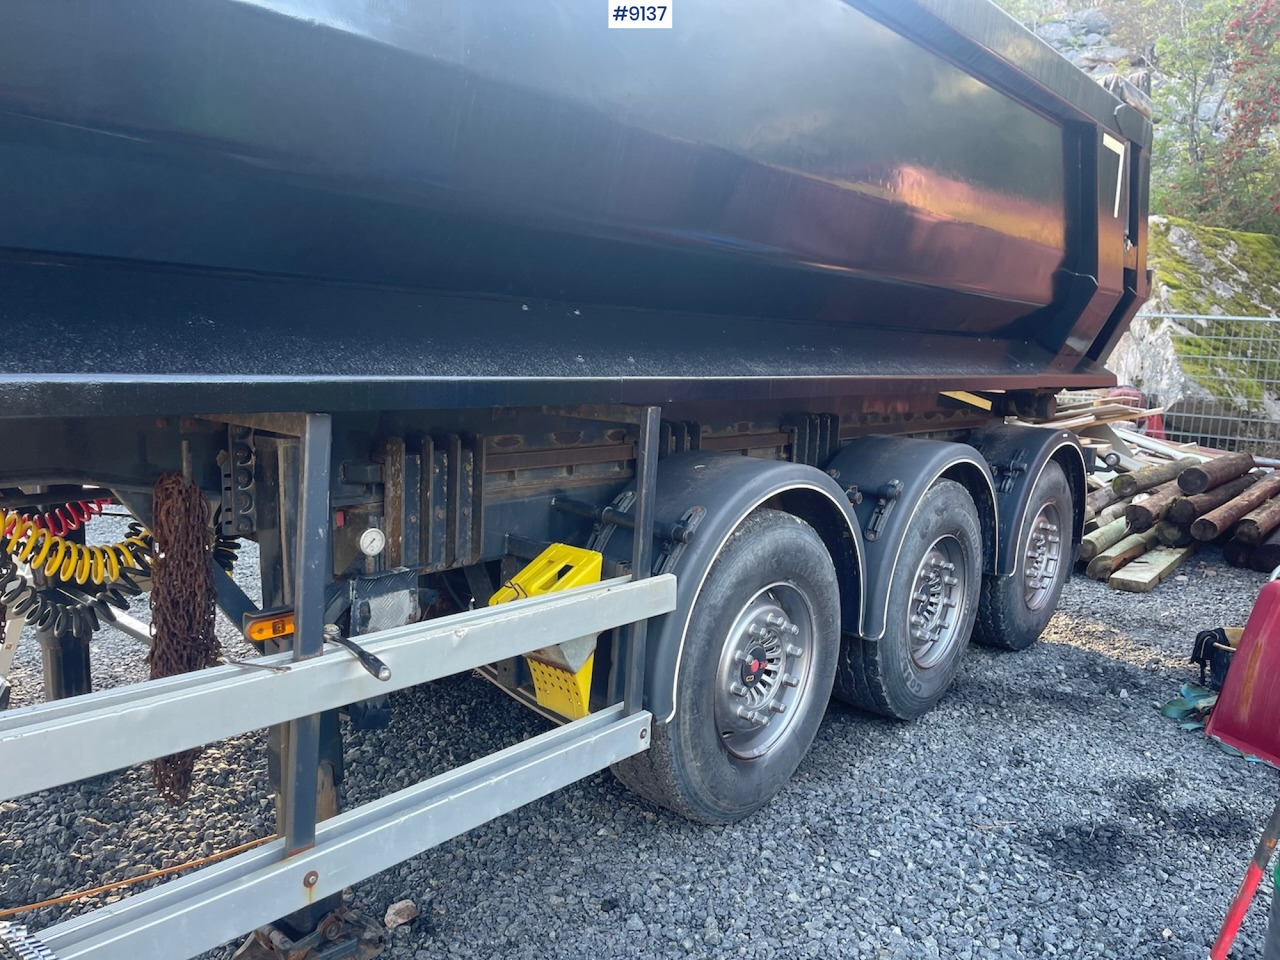 Leasing of  Carnehl tipping semi trailer in good condition Carnehl tipping semi trailer in good condition: picture 5